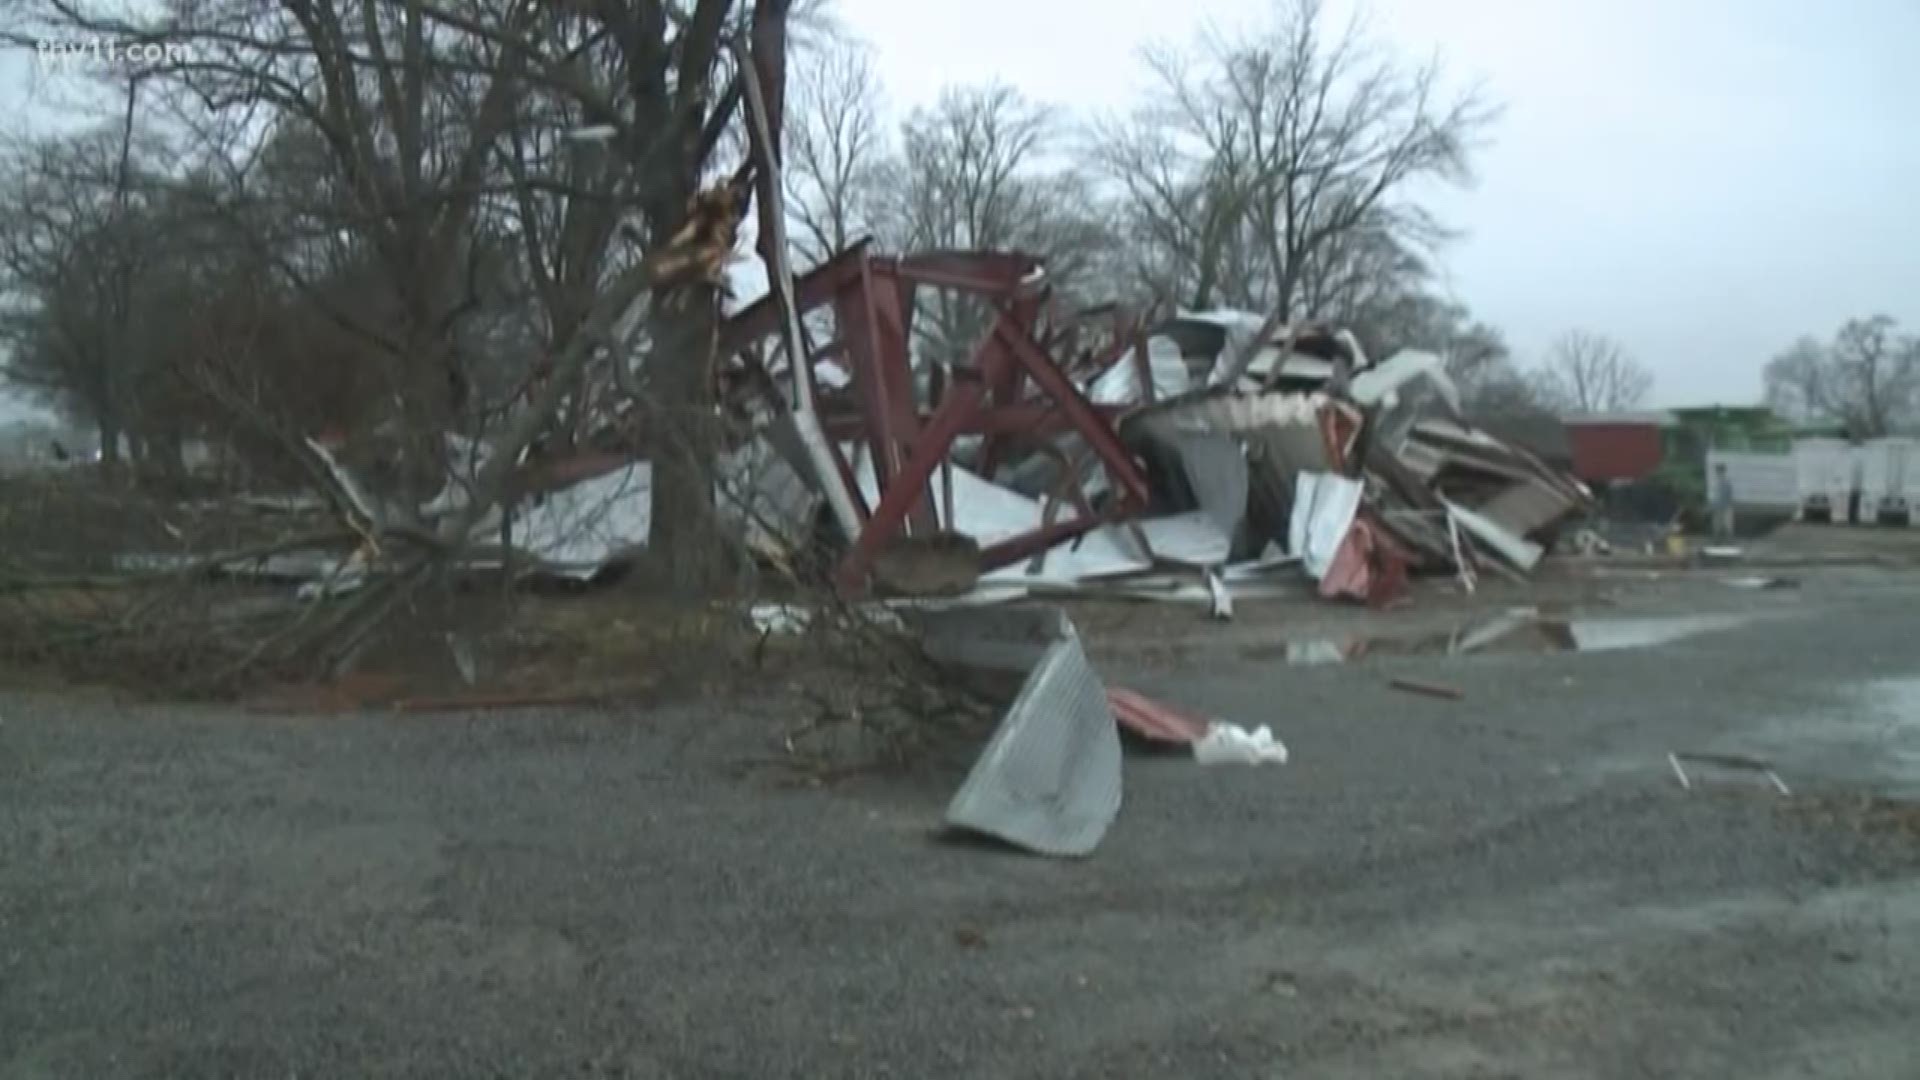 Storm Damage Flooding Around Arkansas After Severe Weather Hits